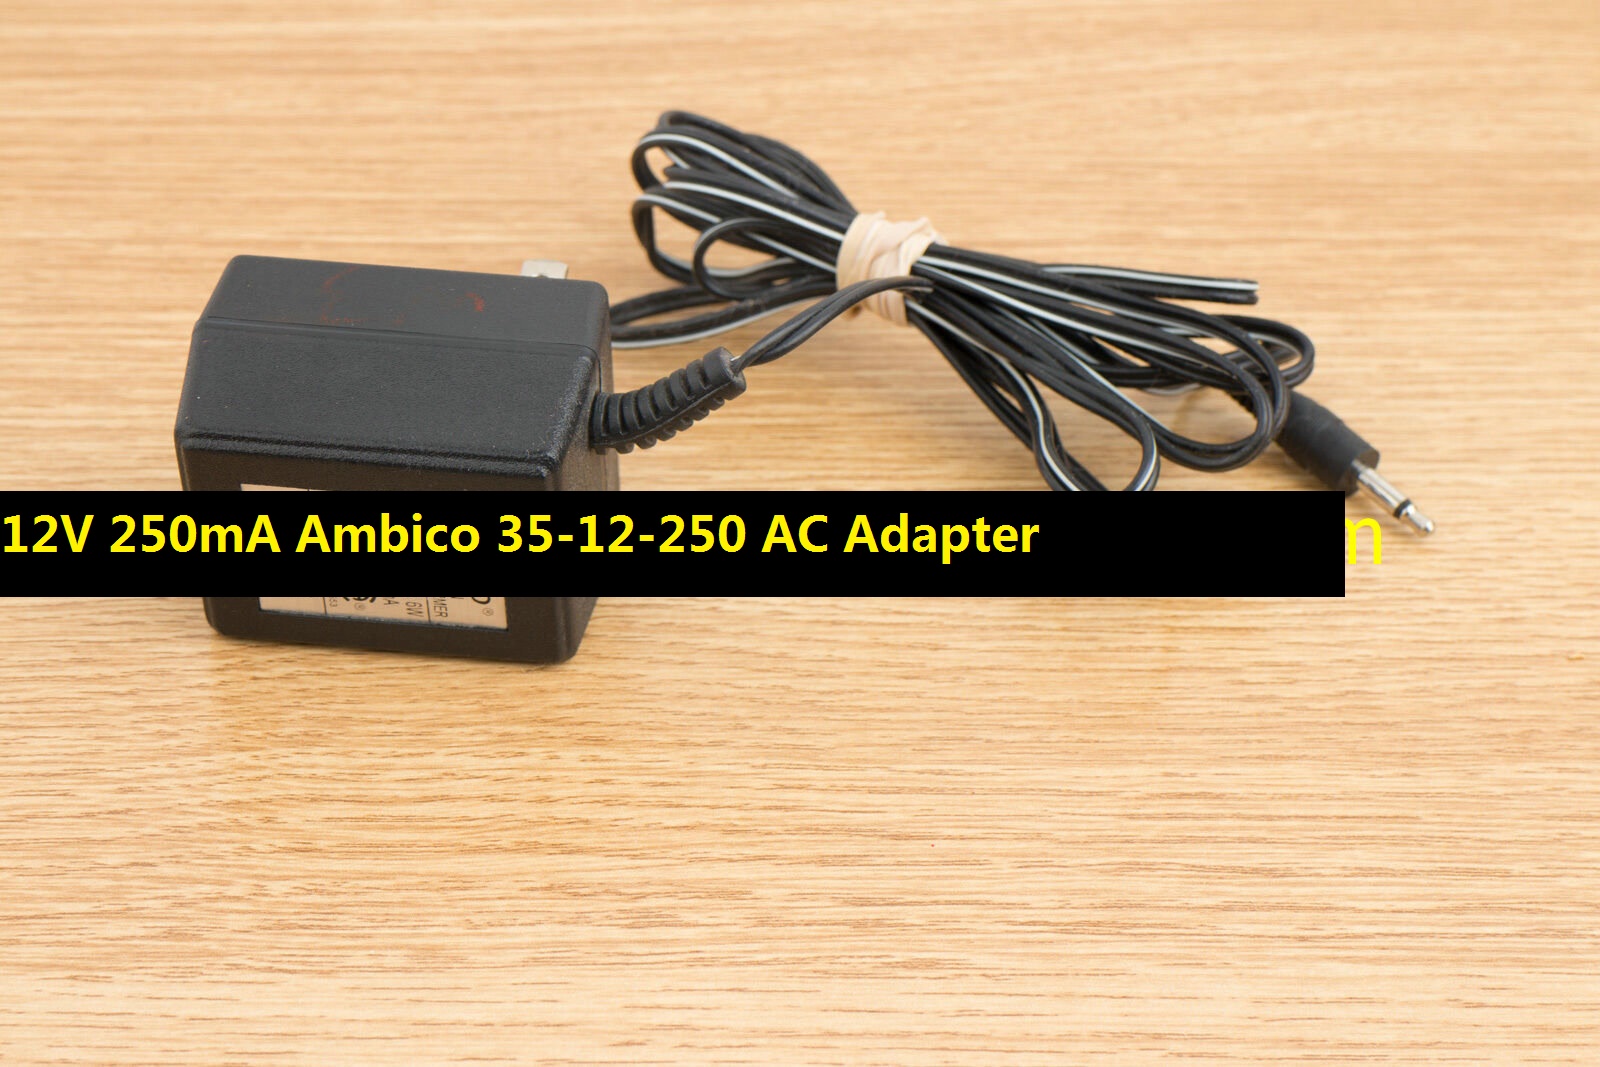 *100% Brand NEW* AC Adapter 12V 250mA Ambico 35-12-250 Power Supply - Click Image to Close